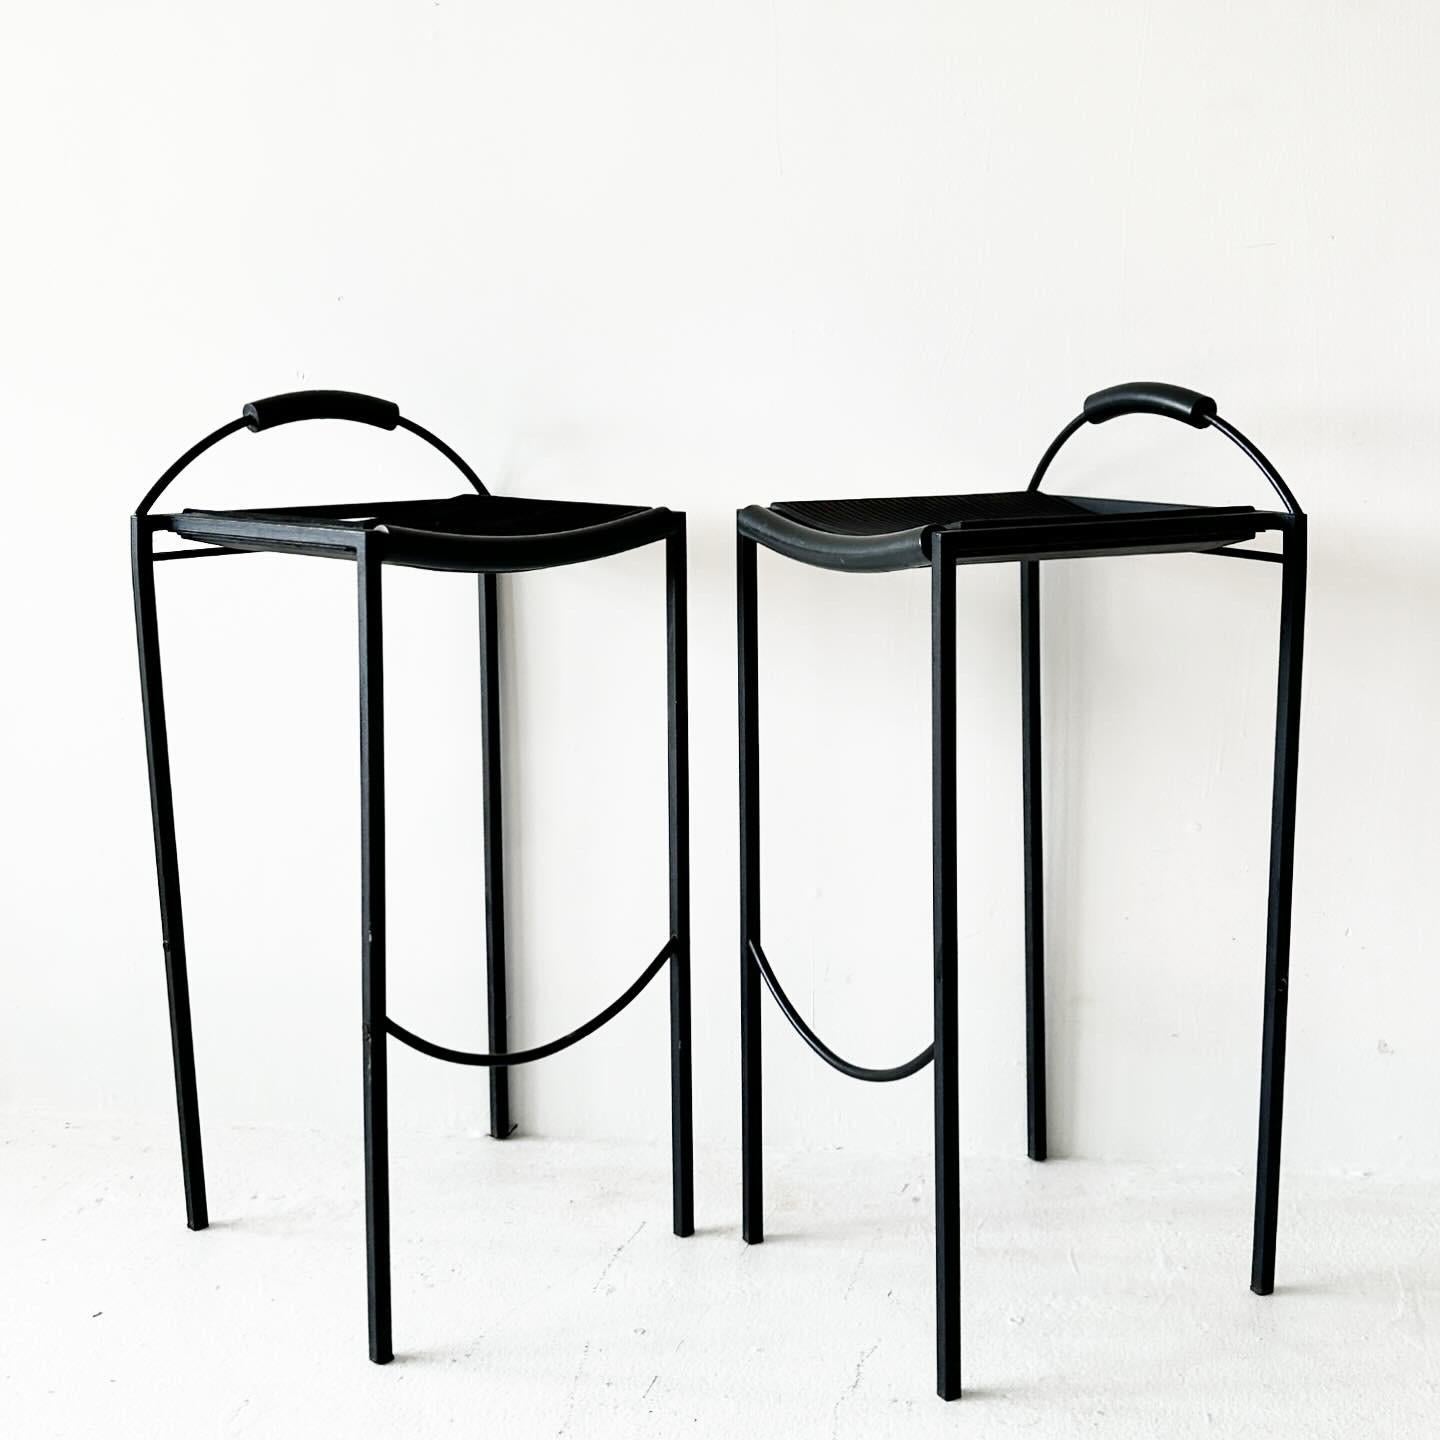 Pair of Sgabello Alto Stools by Maurizio Peregalli. Made in Italy, 1984.

W15.75 D14.5 H32 SH27.5

Wear consistent with age. Compared to other pieces like this online, it appears that bars joining the legs have been removed.

